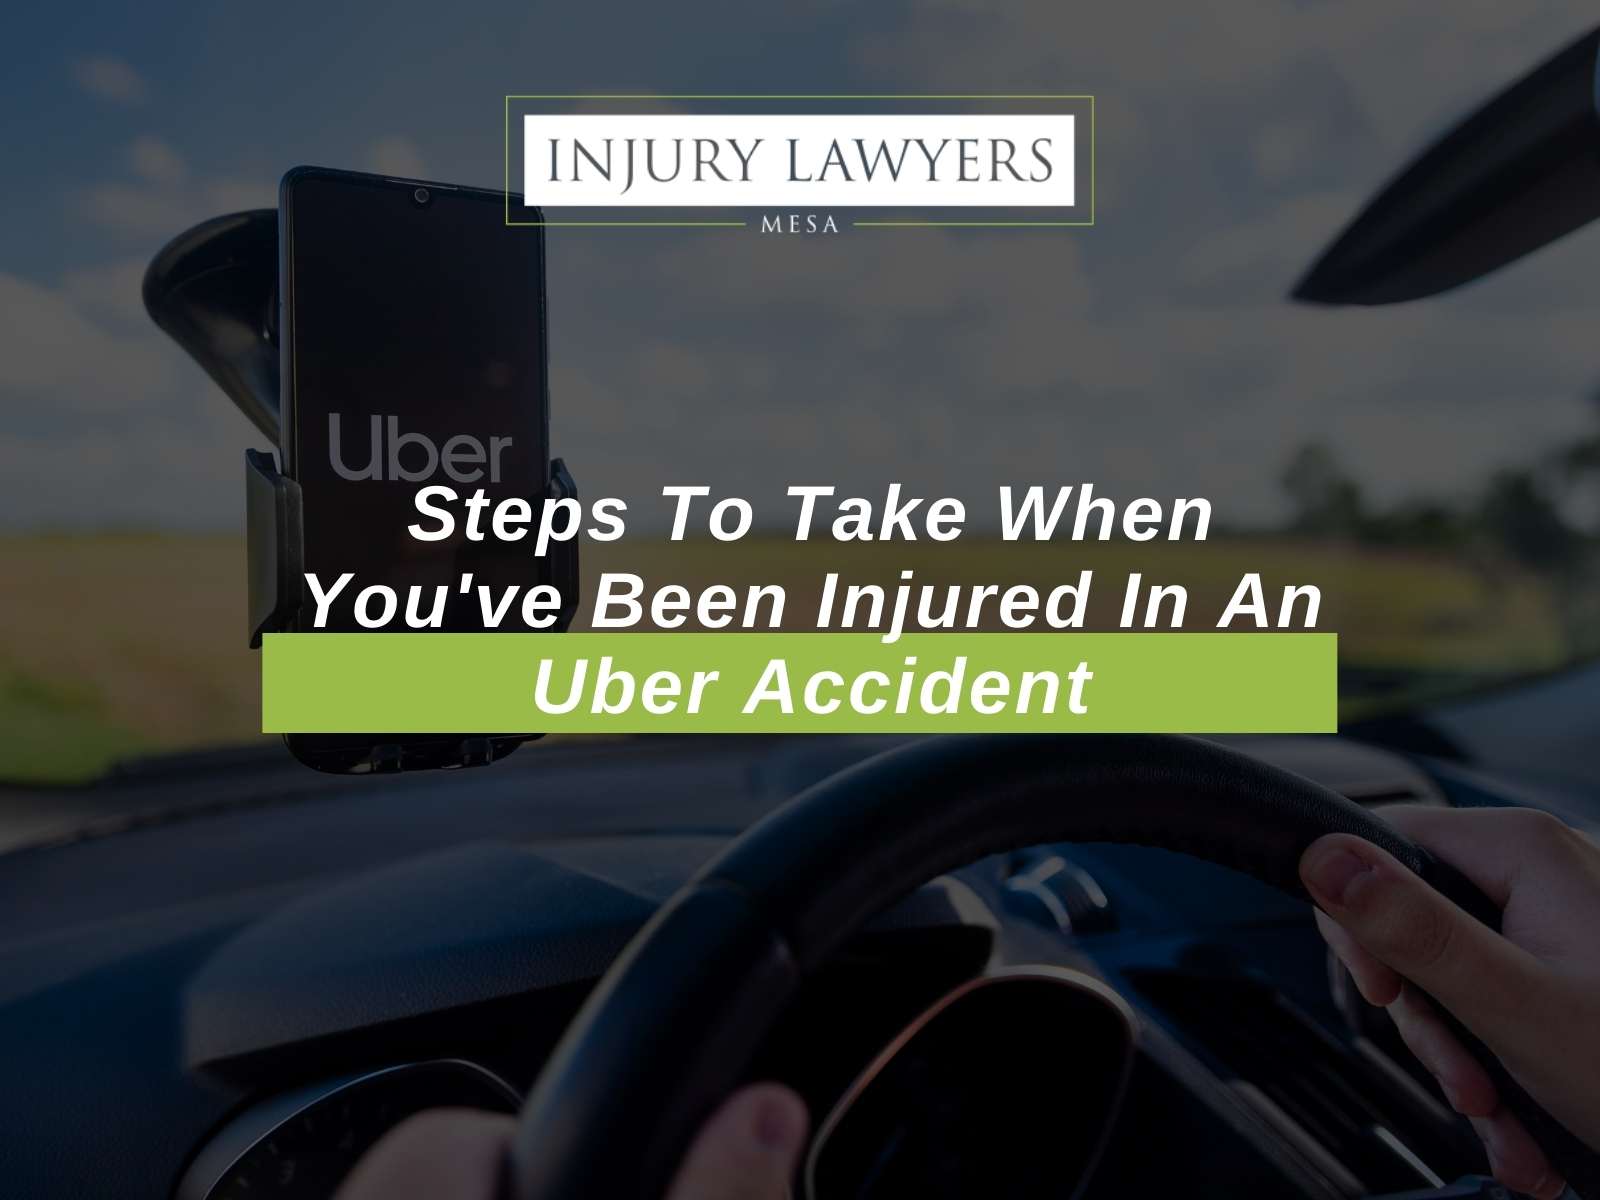 Steps To Take When You've Been Injured In An Uber Accident